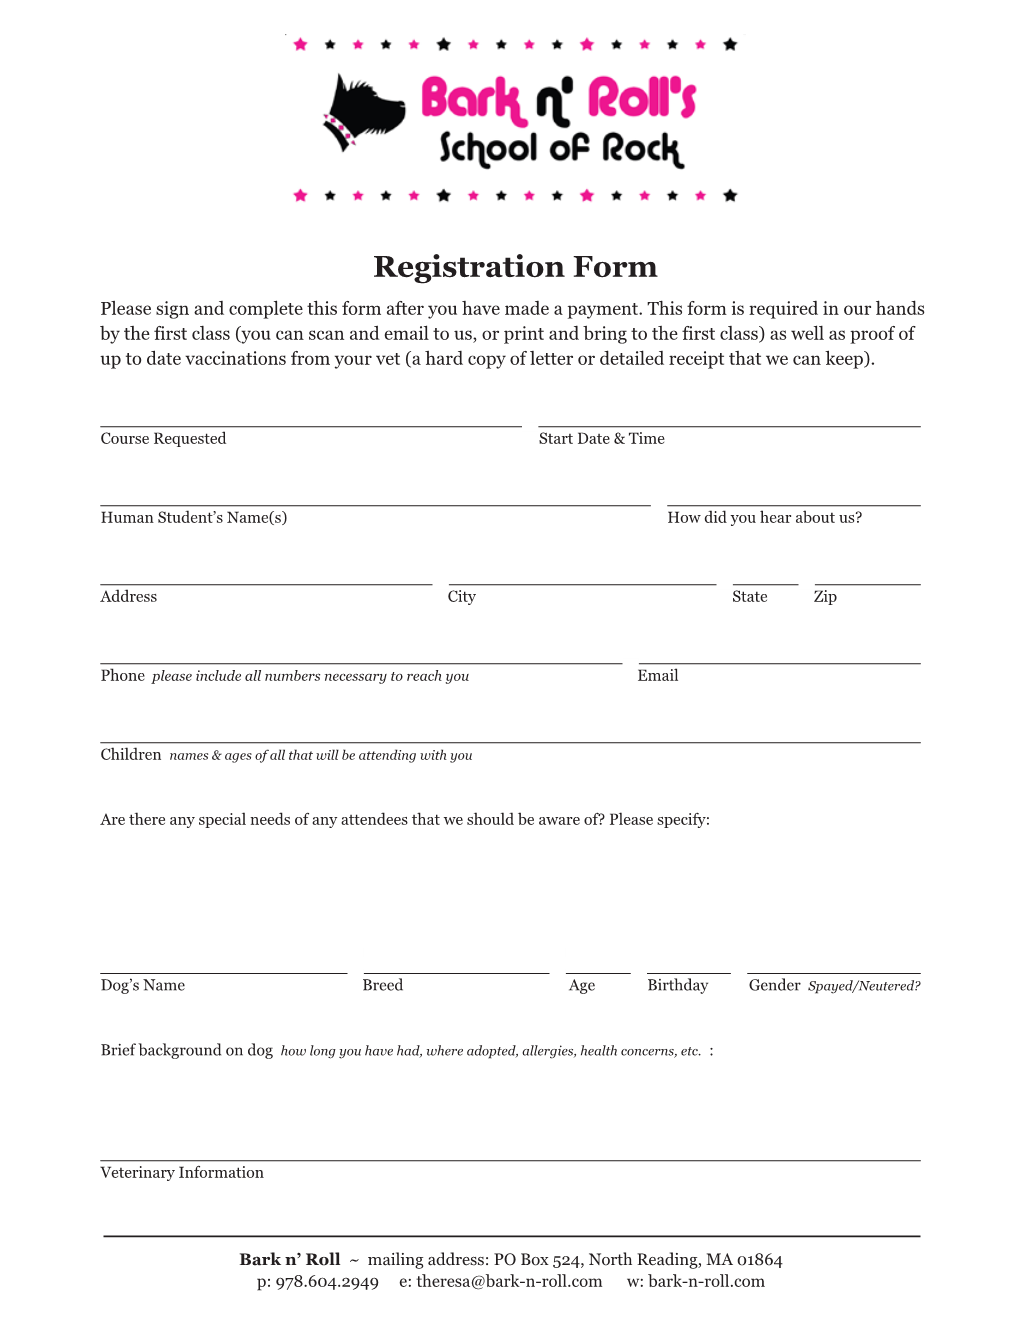 Registration Form Please Sign and Complete This Form After You Have Made a Payment